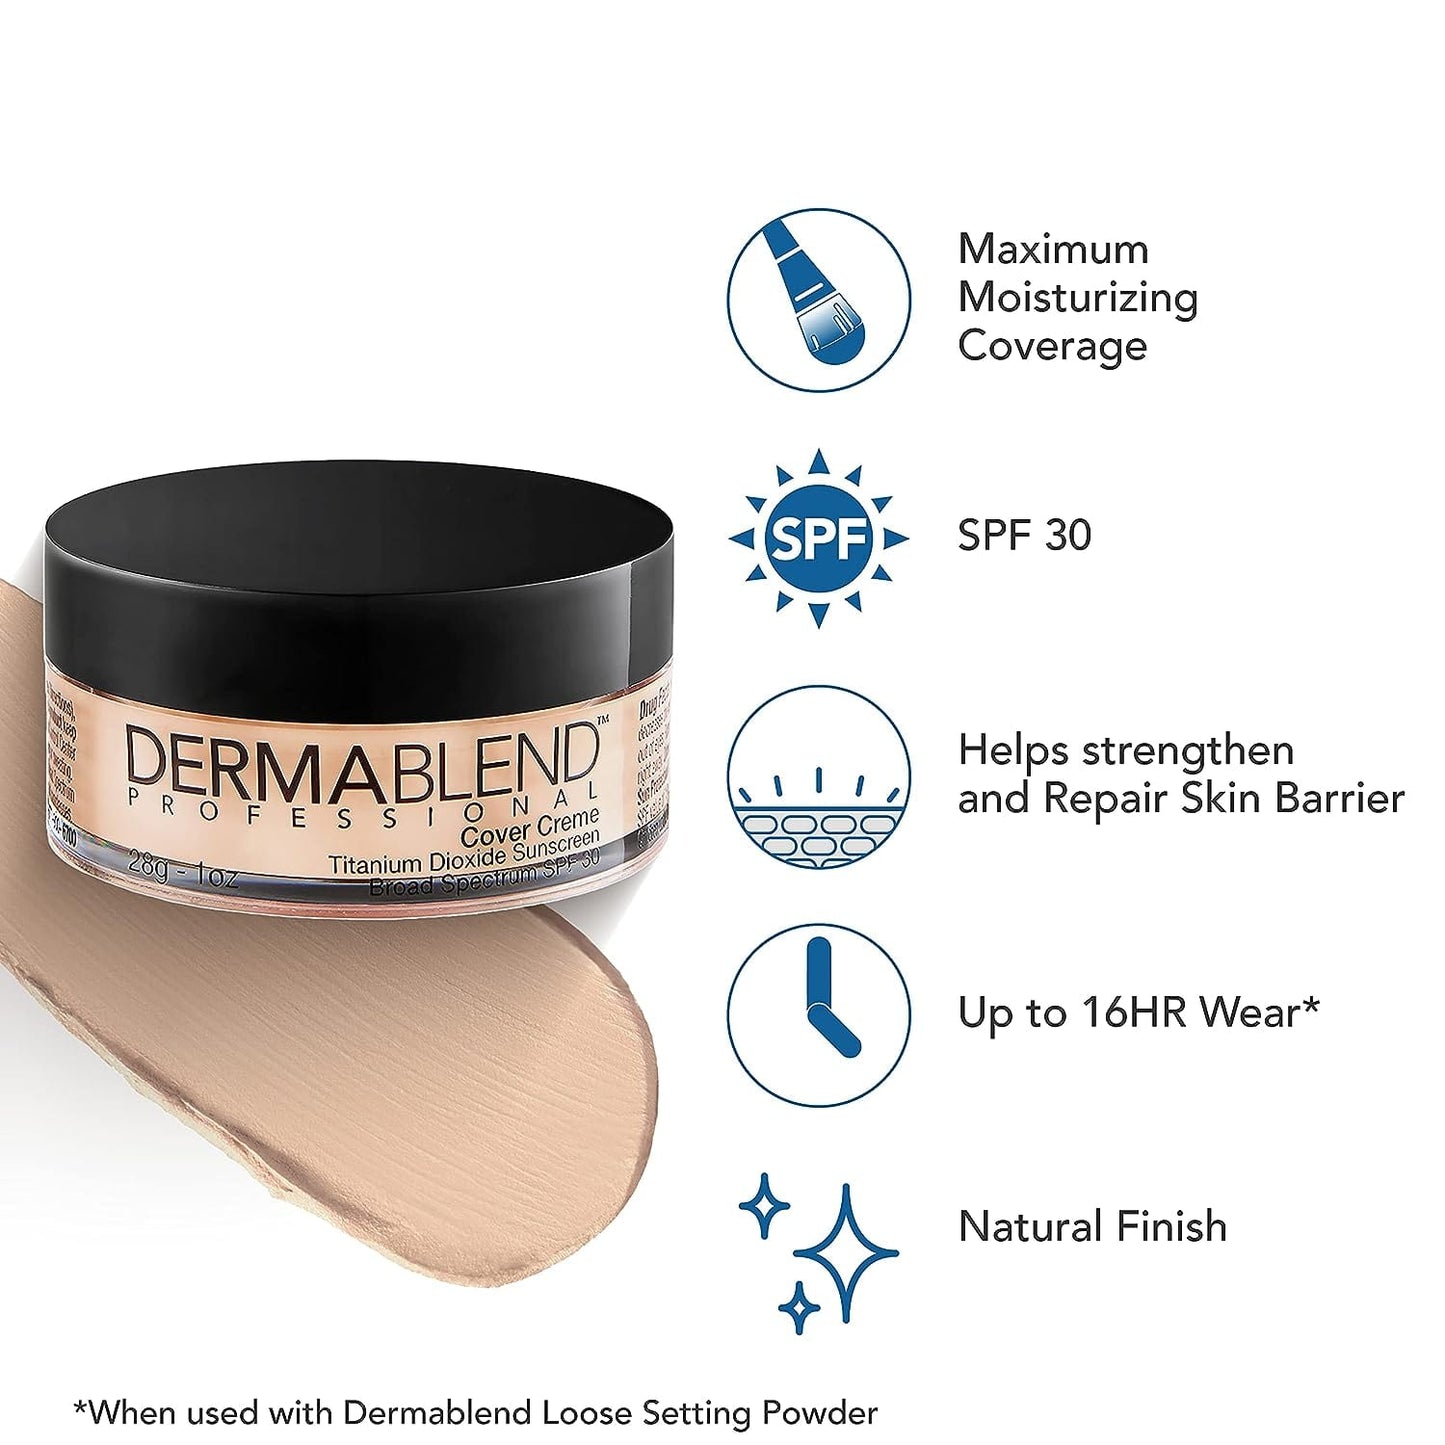 DERMABLEND COVER CREME 1OZ